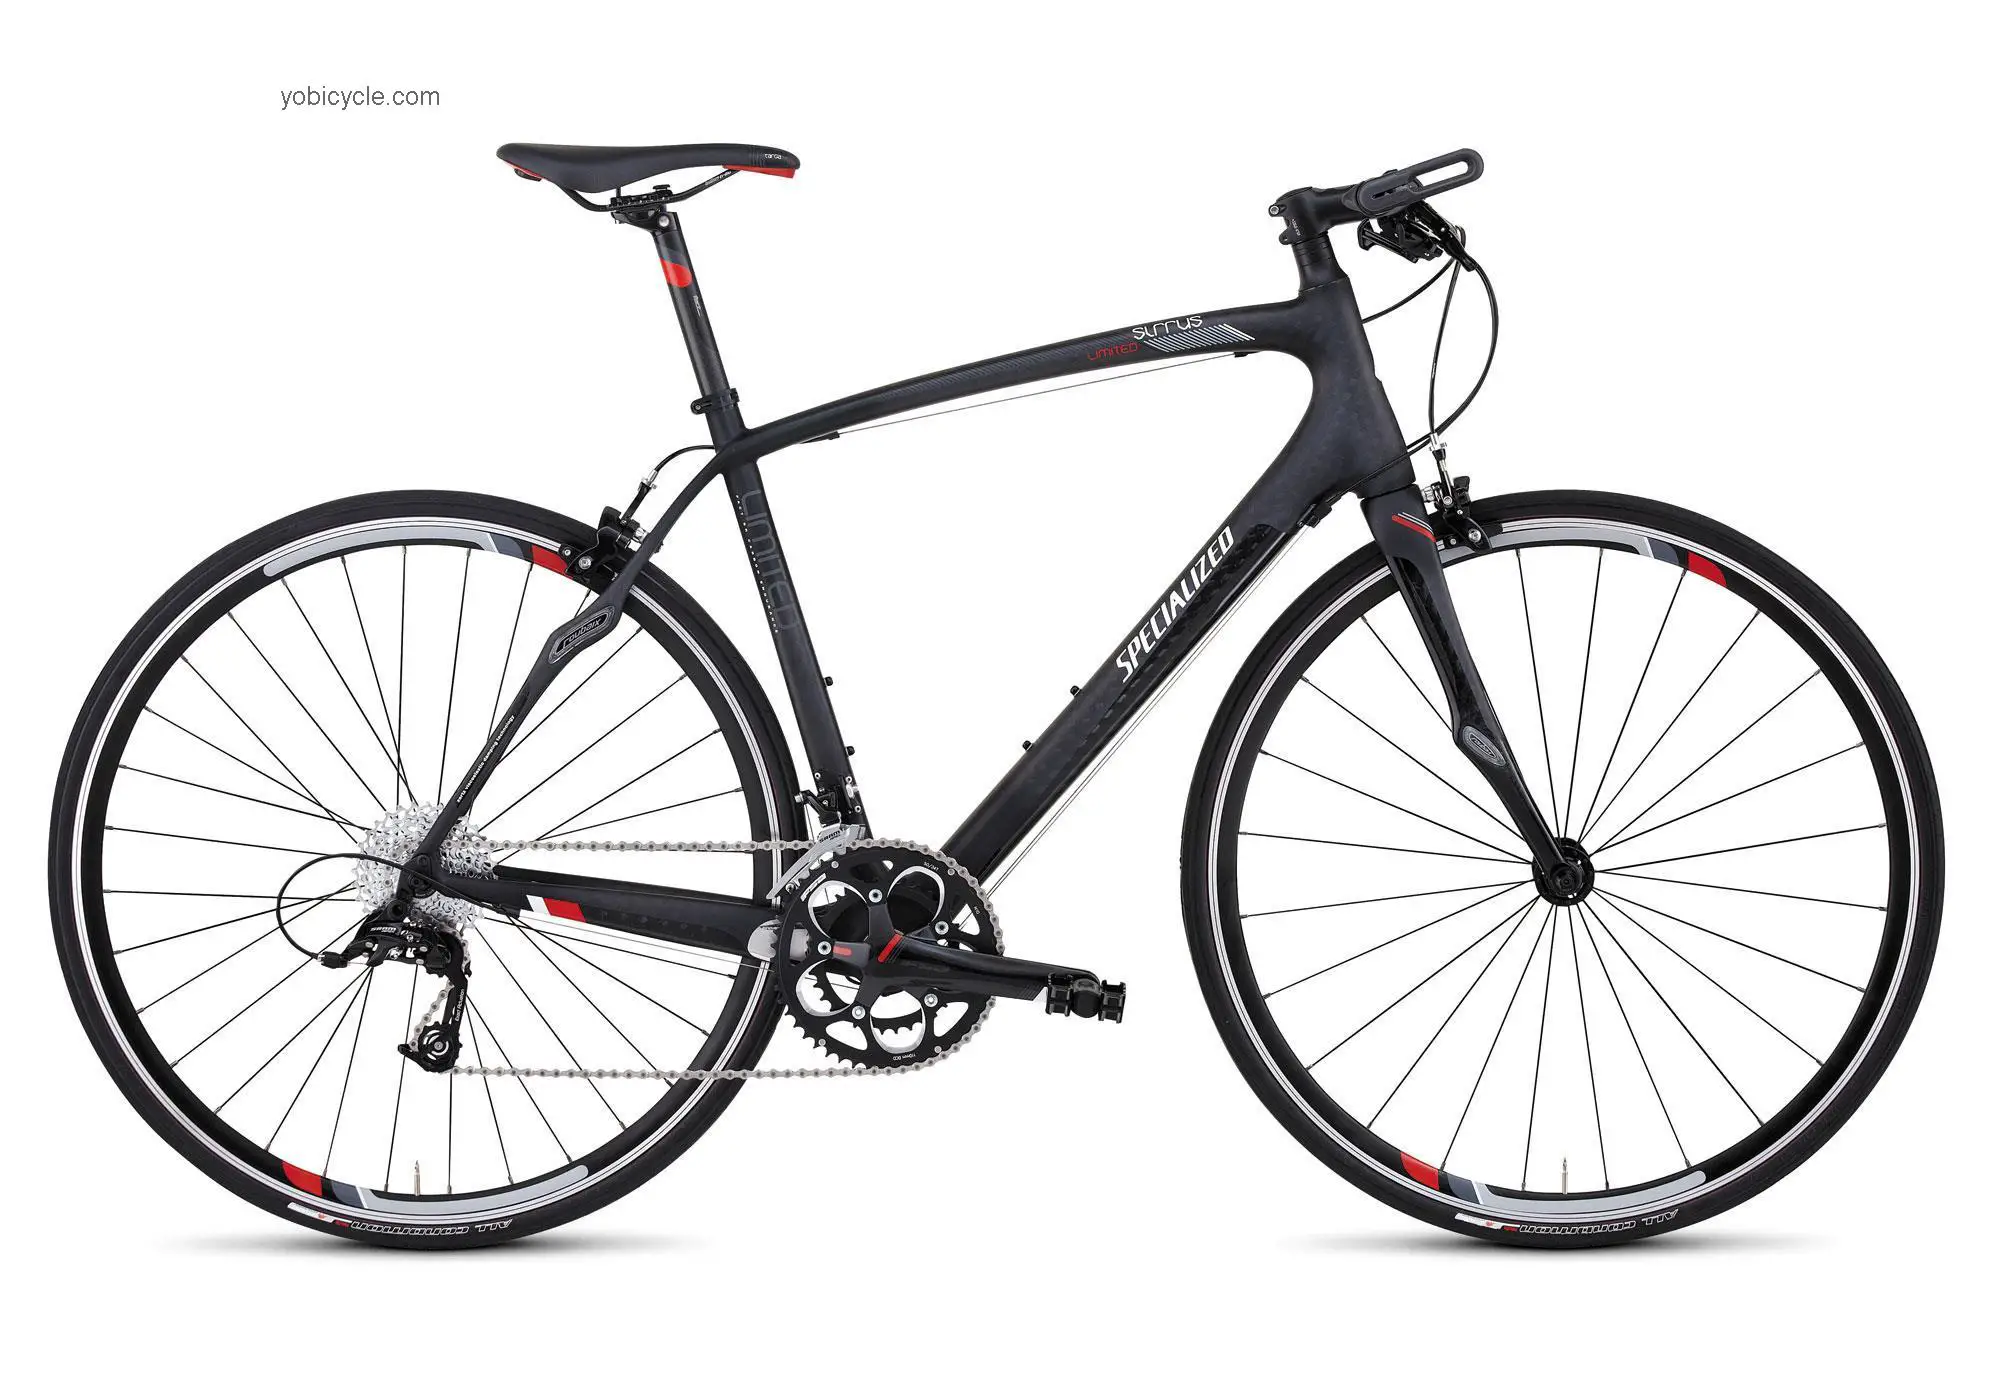 Specialized Sirrus Limited 2012 comparison online with competitors